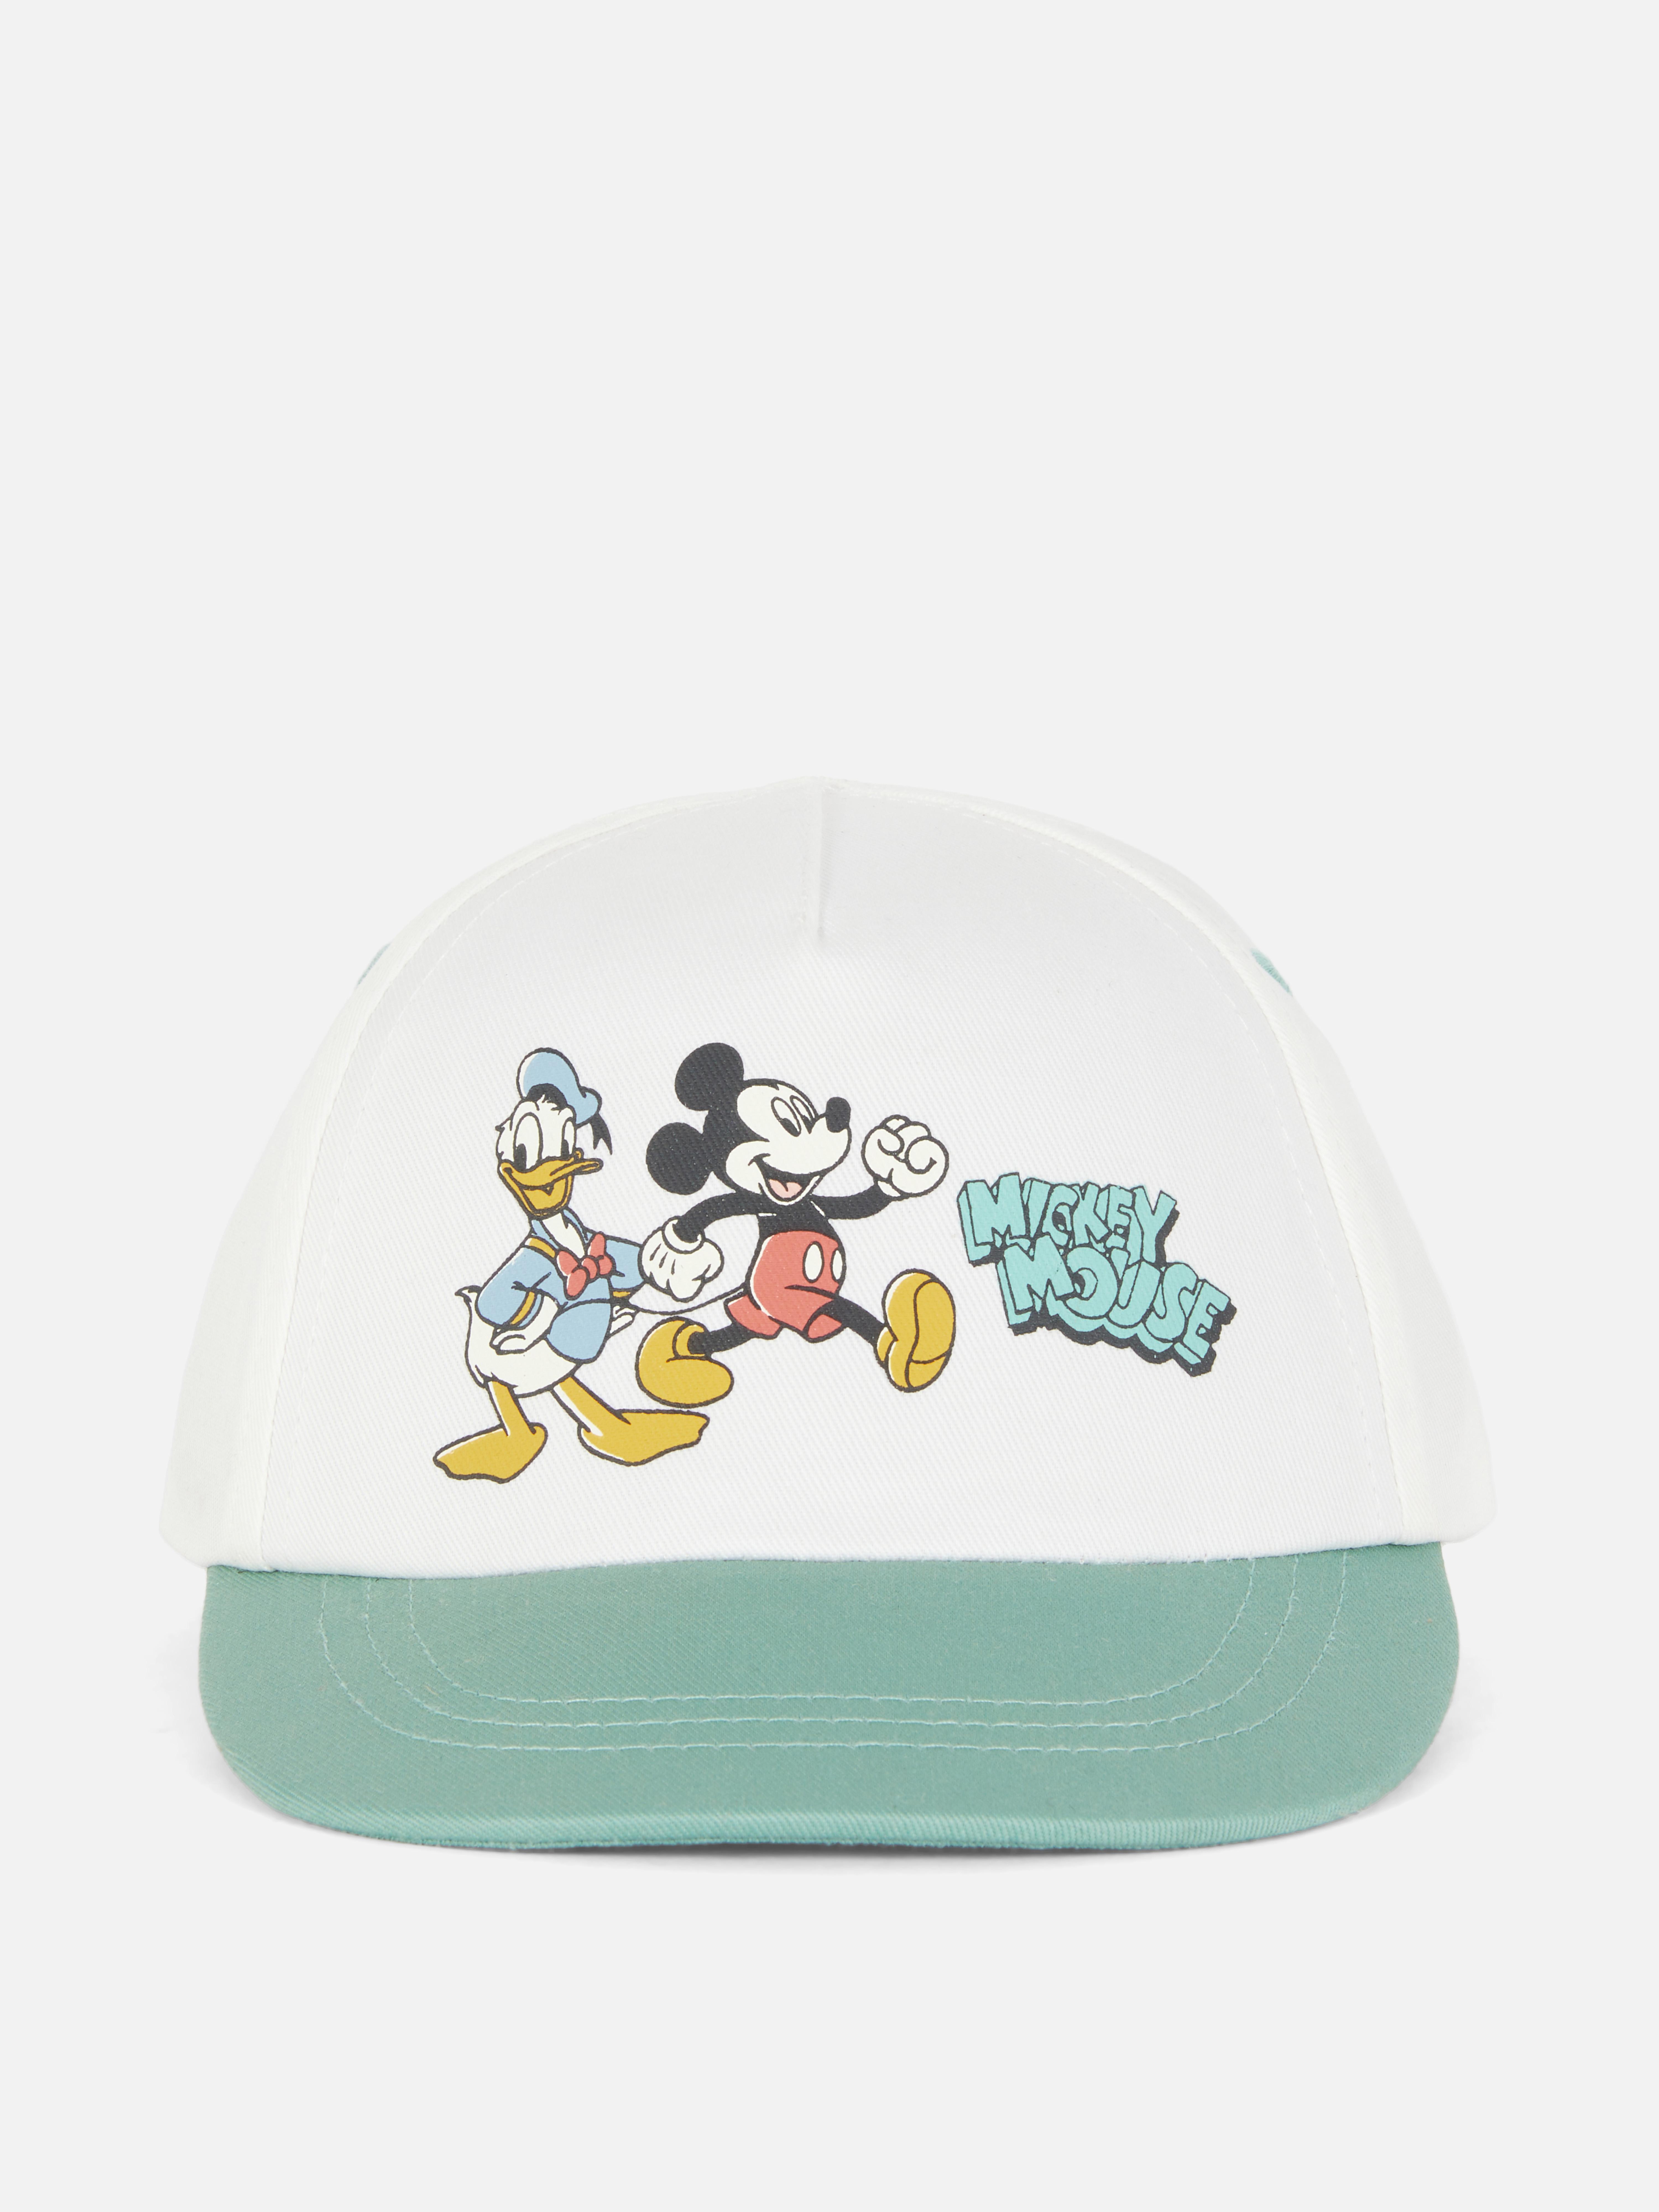 Disney’s Mickey Mouse & Friends Two-Tone Cap